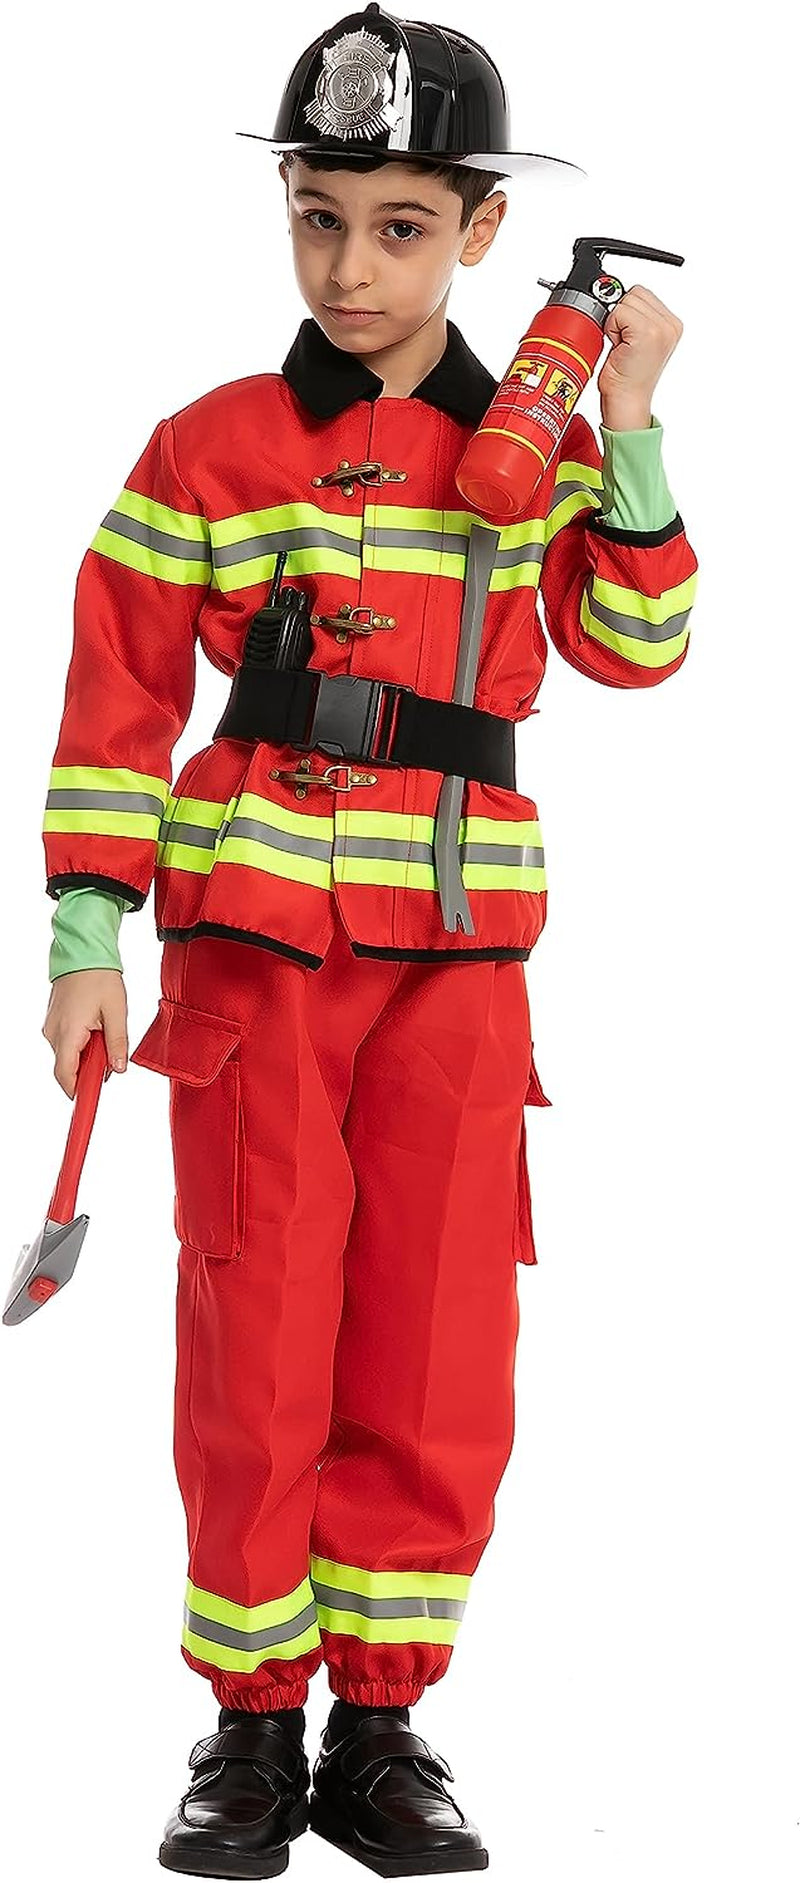 Spooktacular Creations Child Unisex Red Fireman Costume for Halloween Dress Up-3T